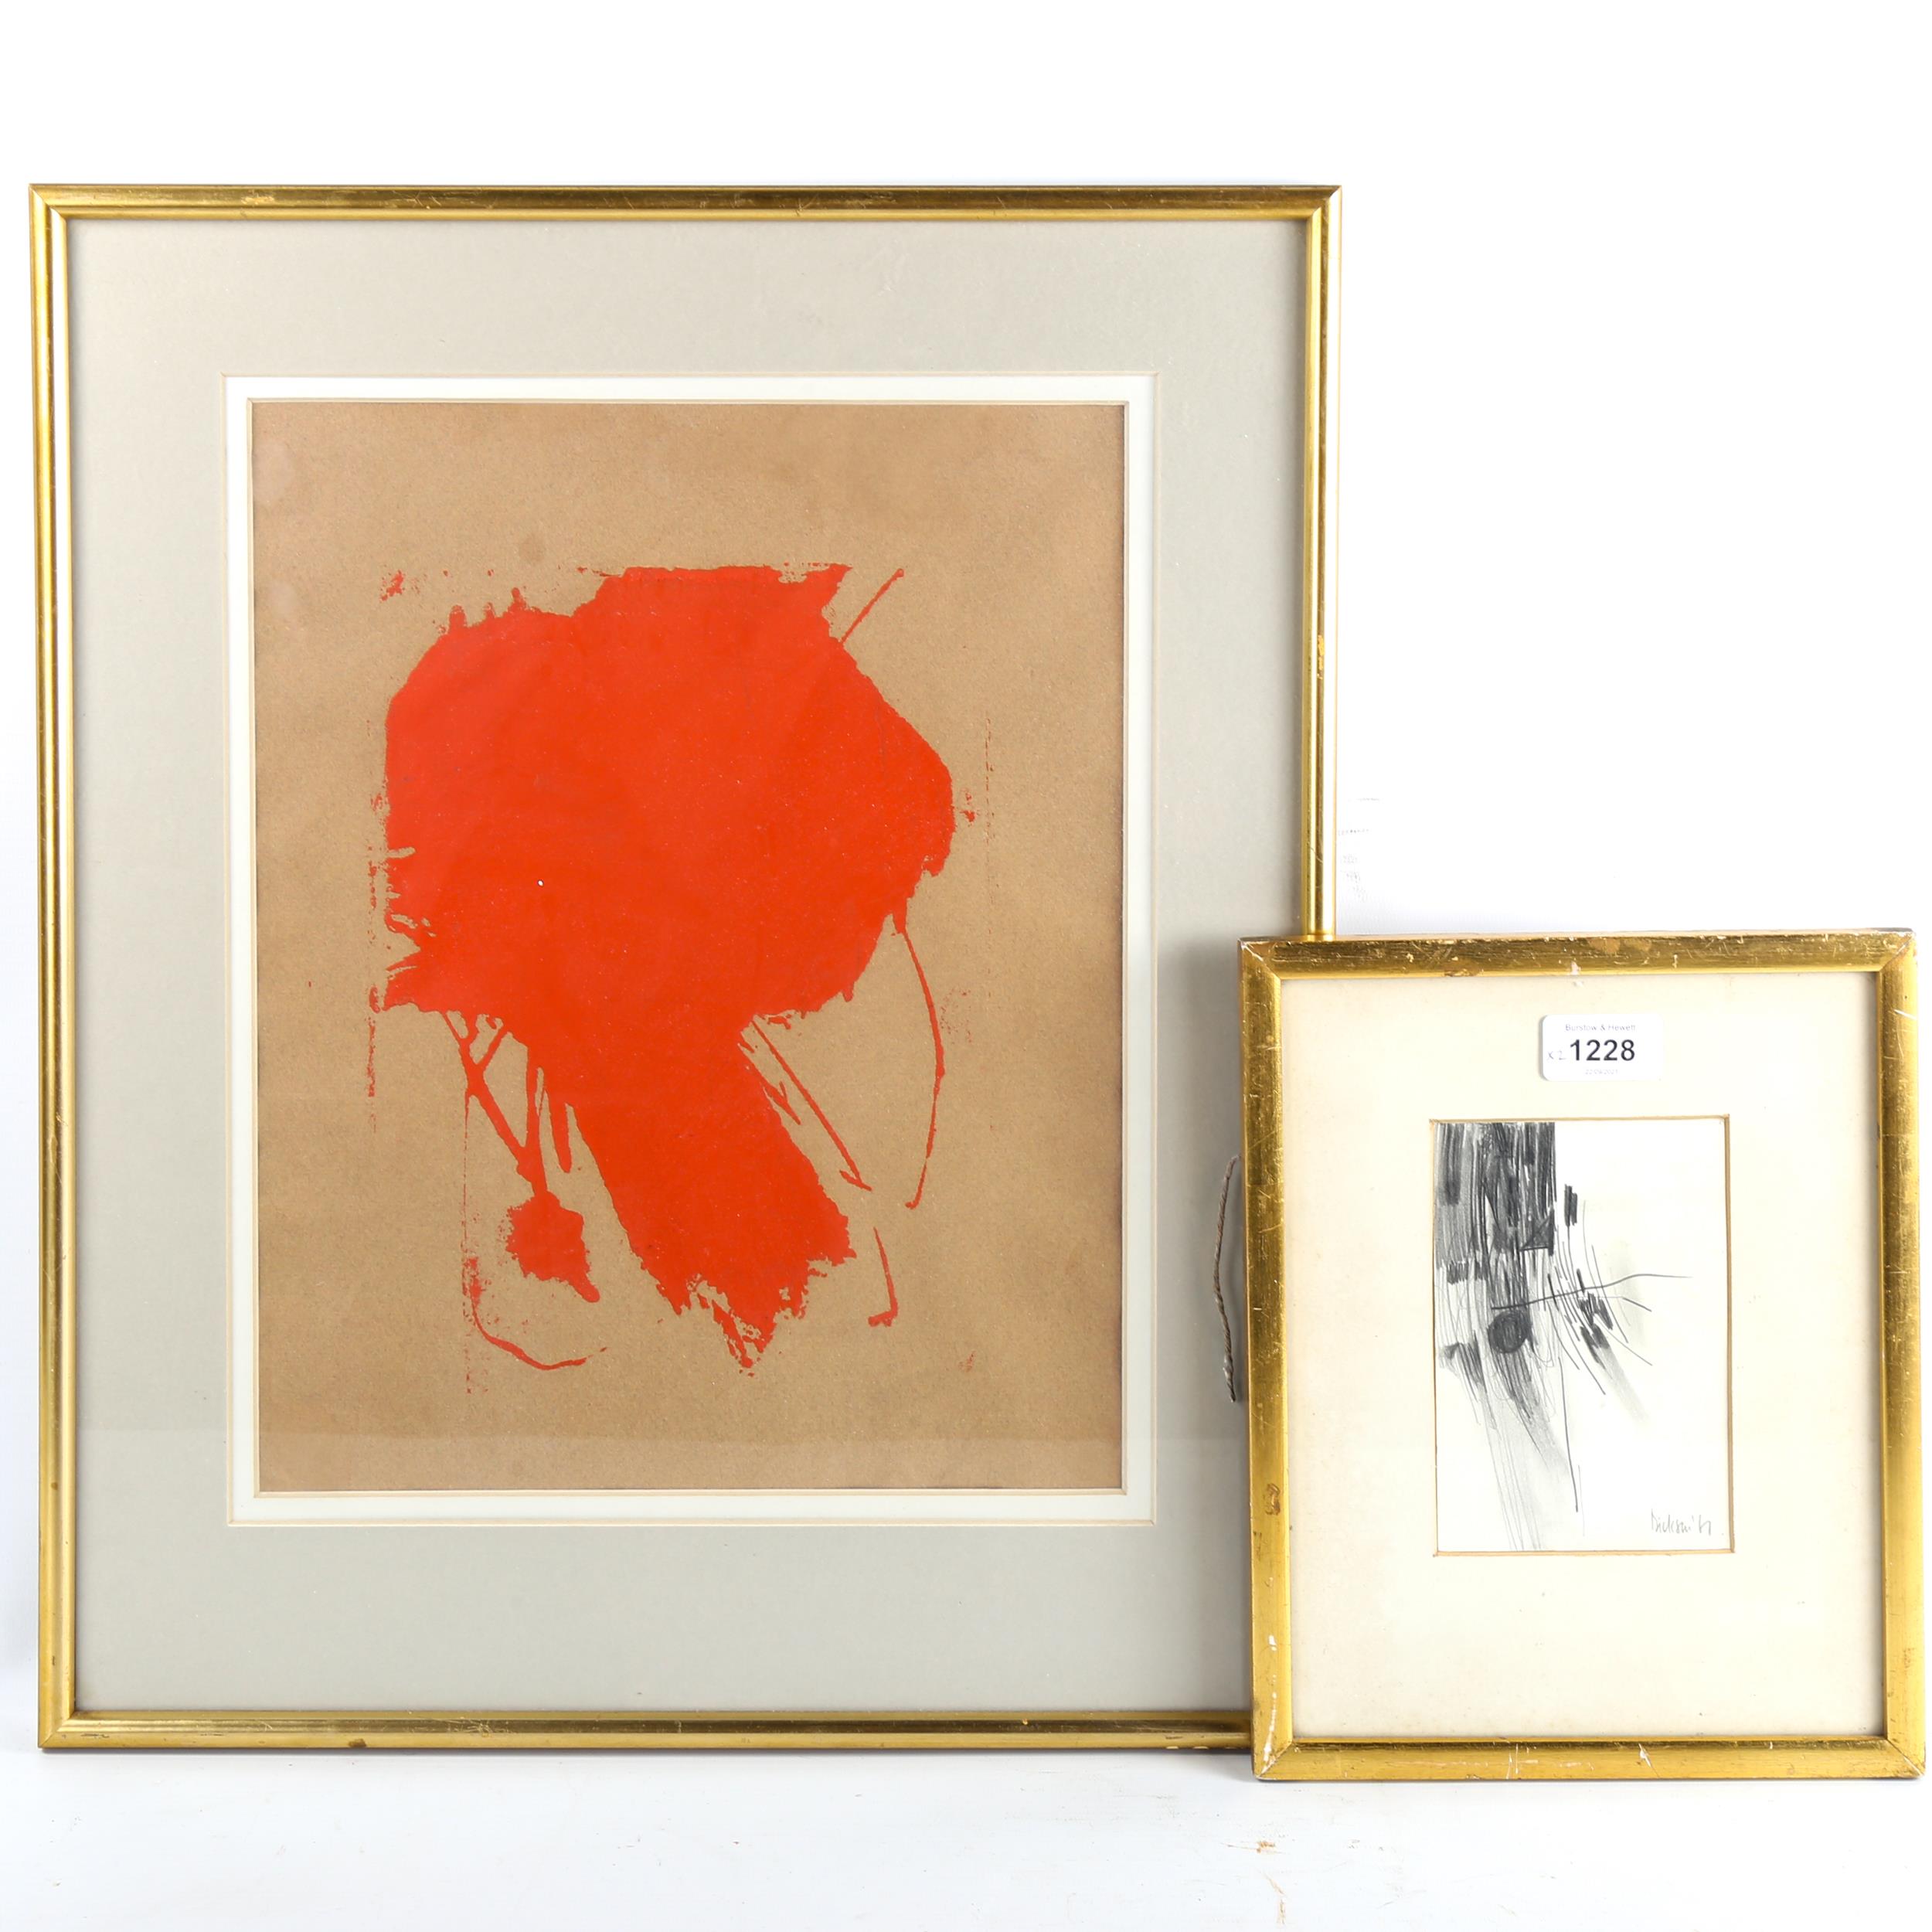 Jennifer Dickson, pencil drawing, crucifix 1961, 14cm x 9cm, and a mid-20th century red paint on